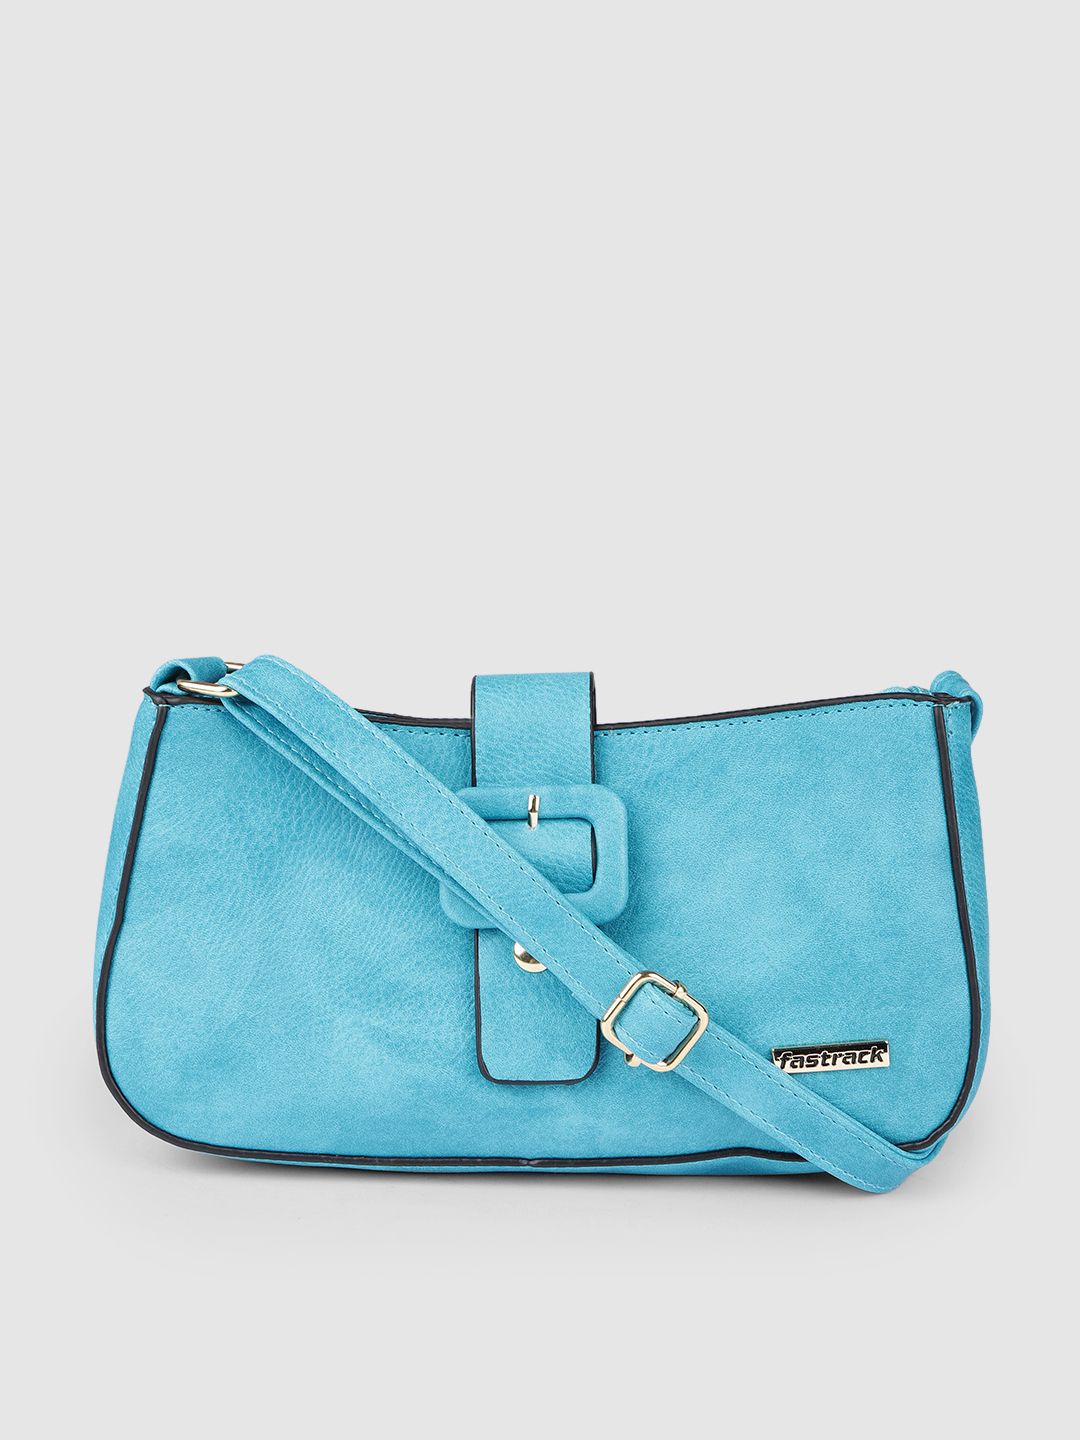 Fastrack Blue Solid Sling Bag Price in India